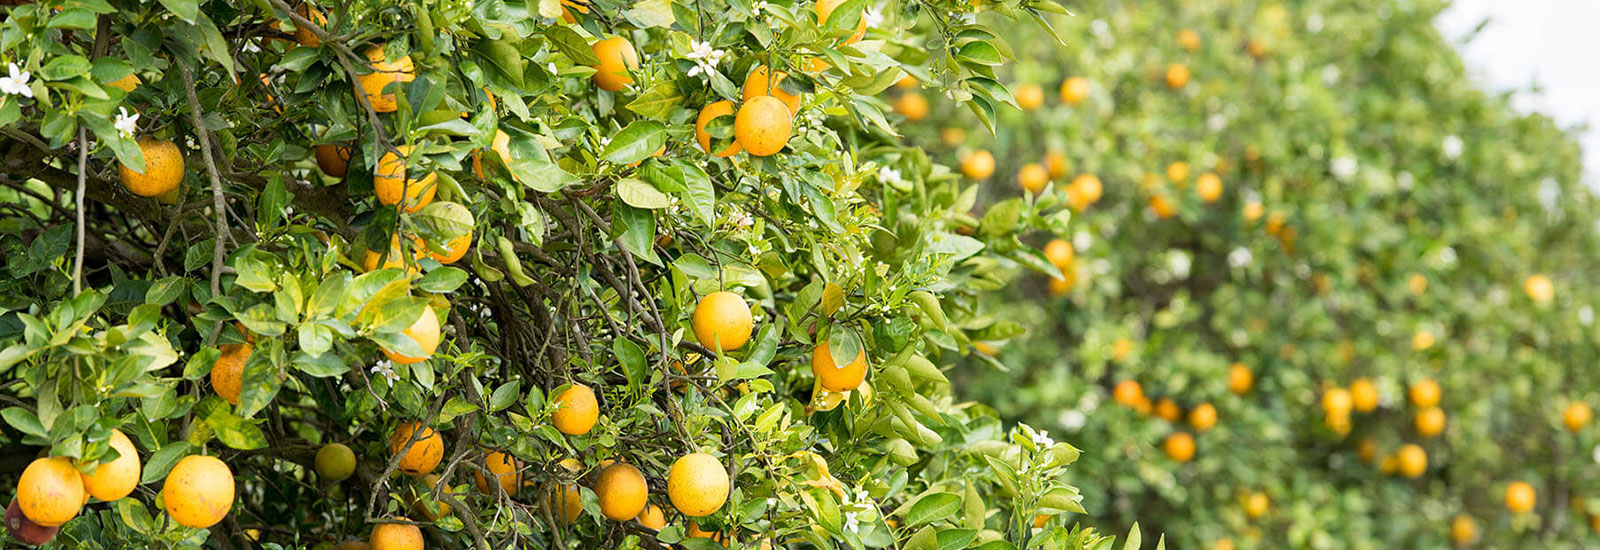 Why is Poncirus trifoliata resistant to colonization by Asian citrus psyllid?